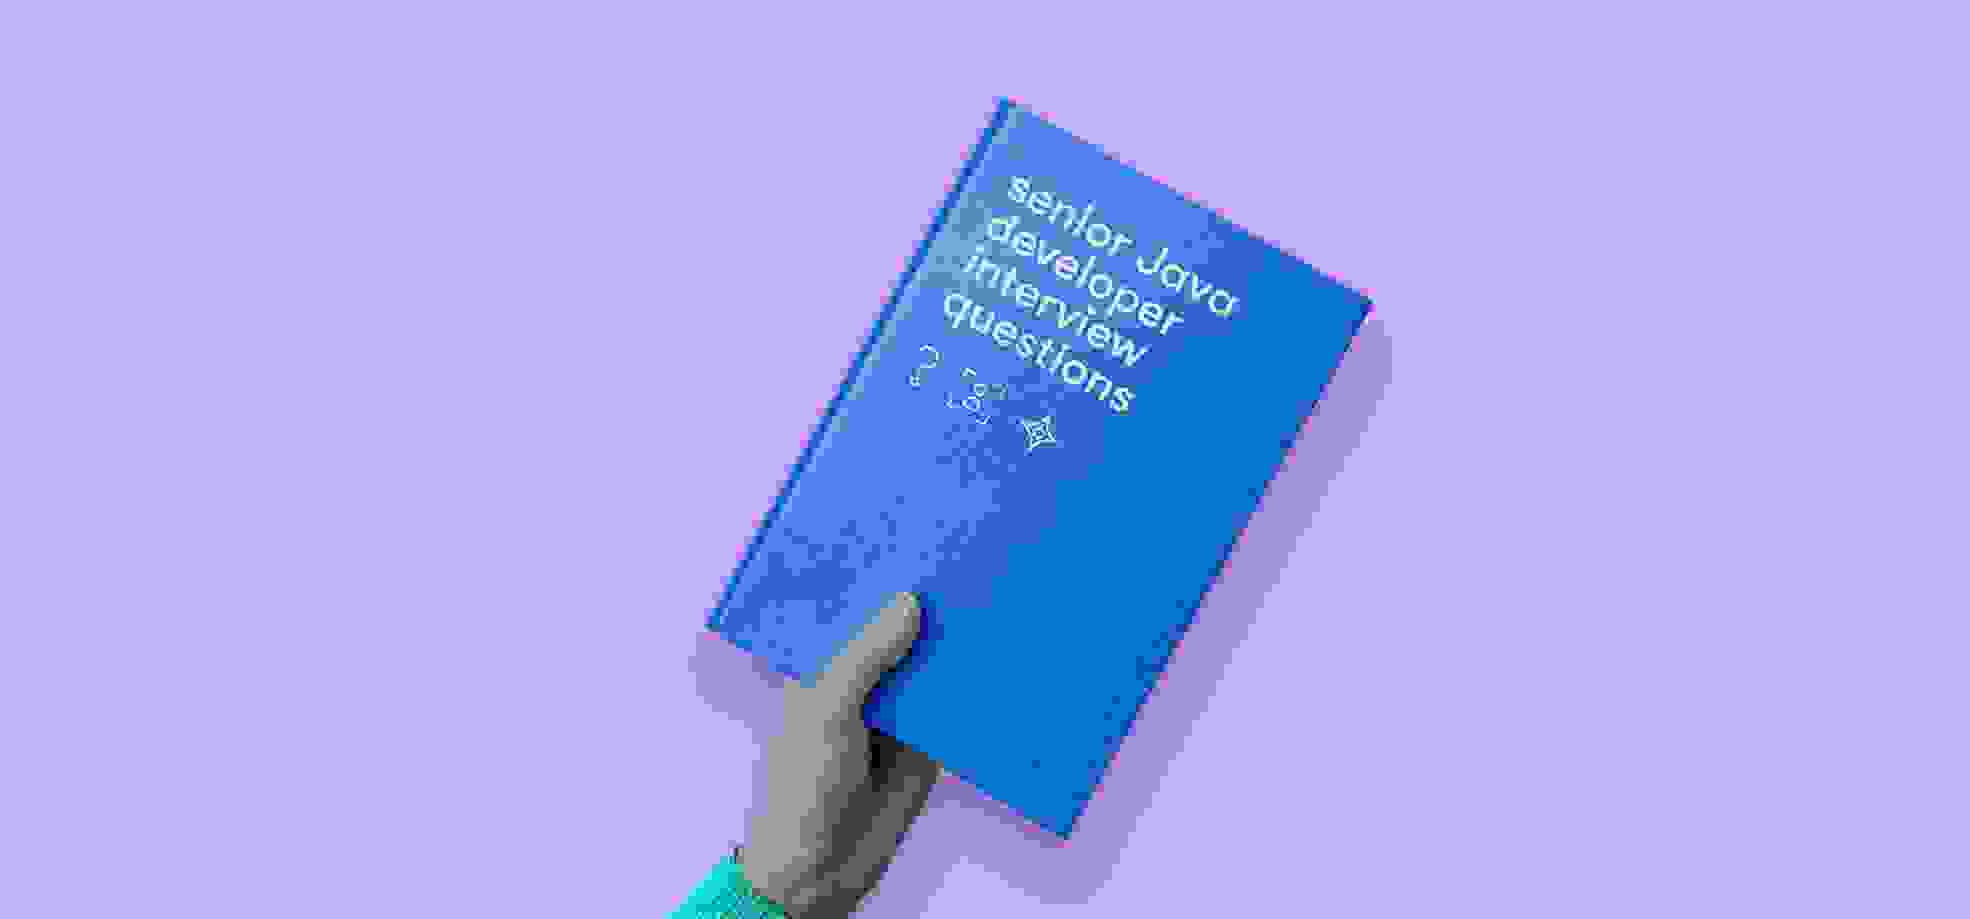 hand with book "senior java developer interview questions"